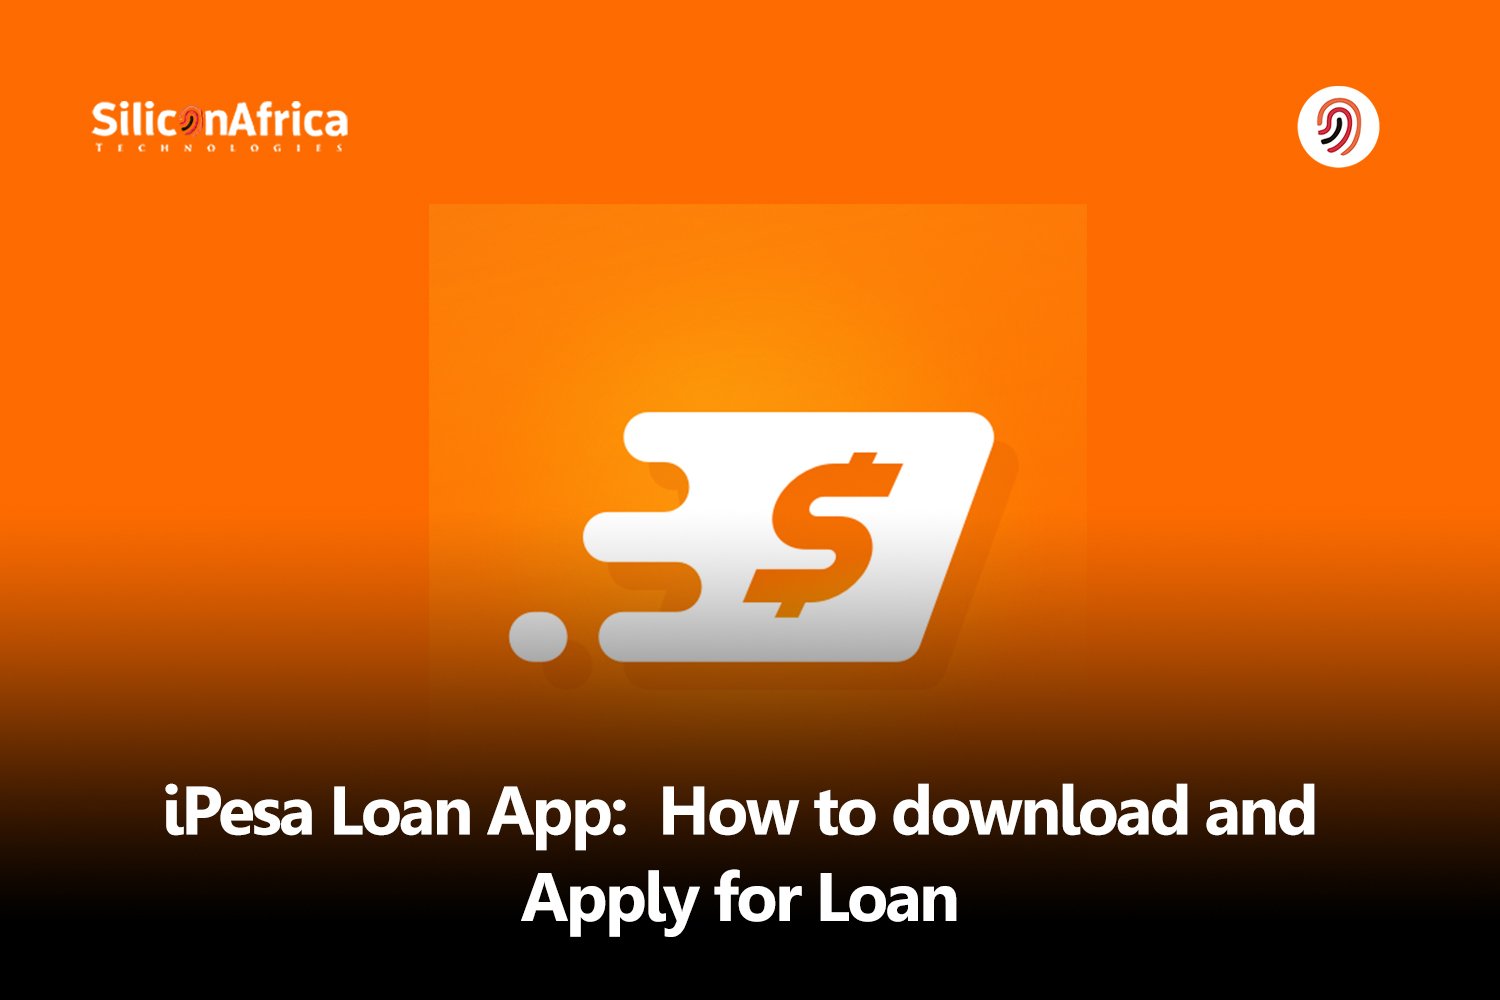 iPesa Loan App: How to Download and Apply For Loan